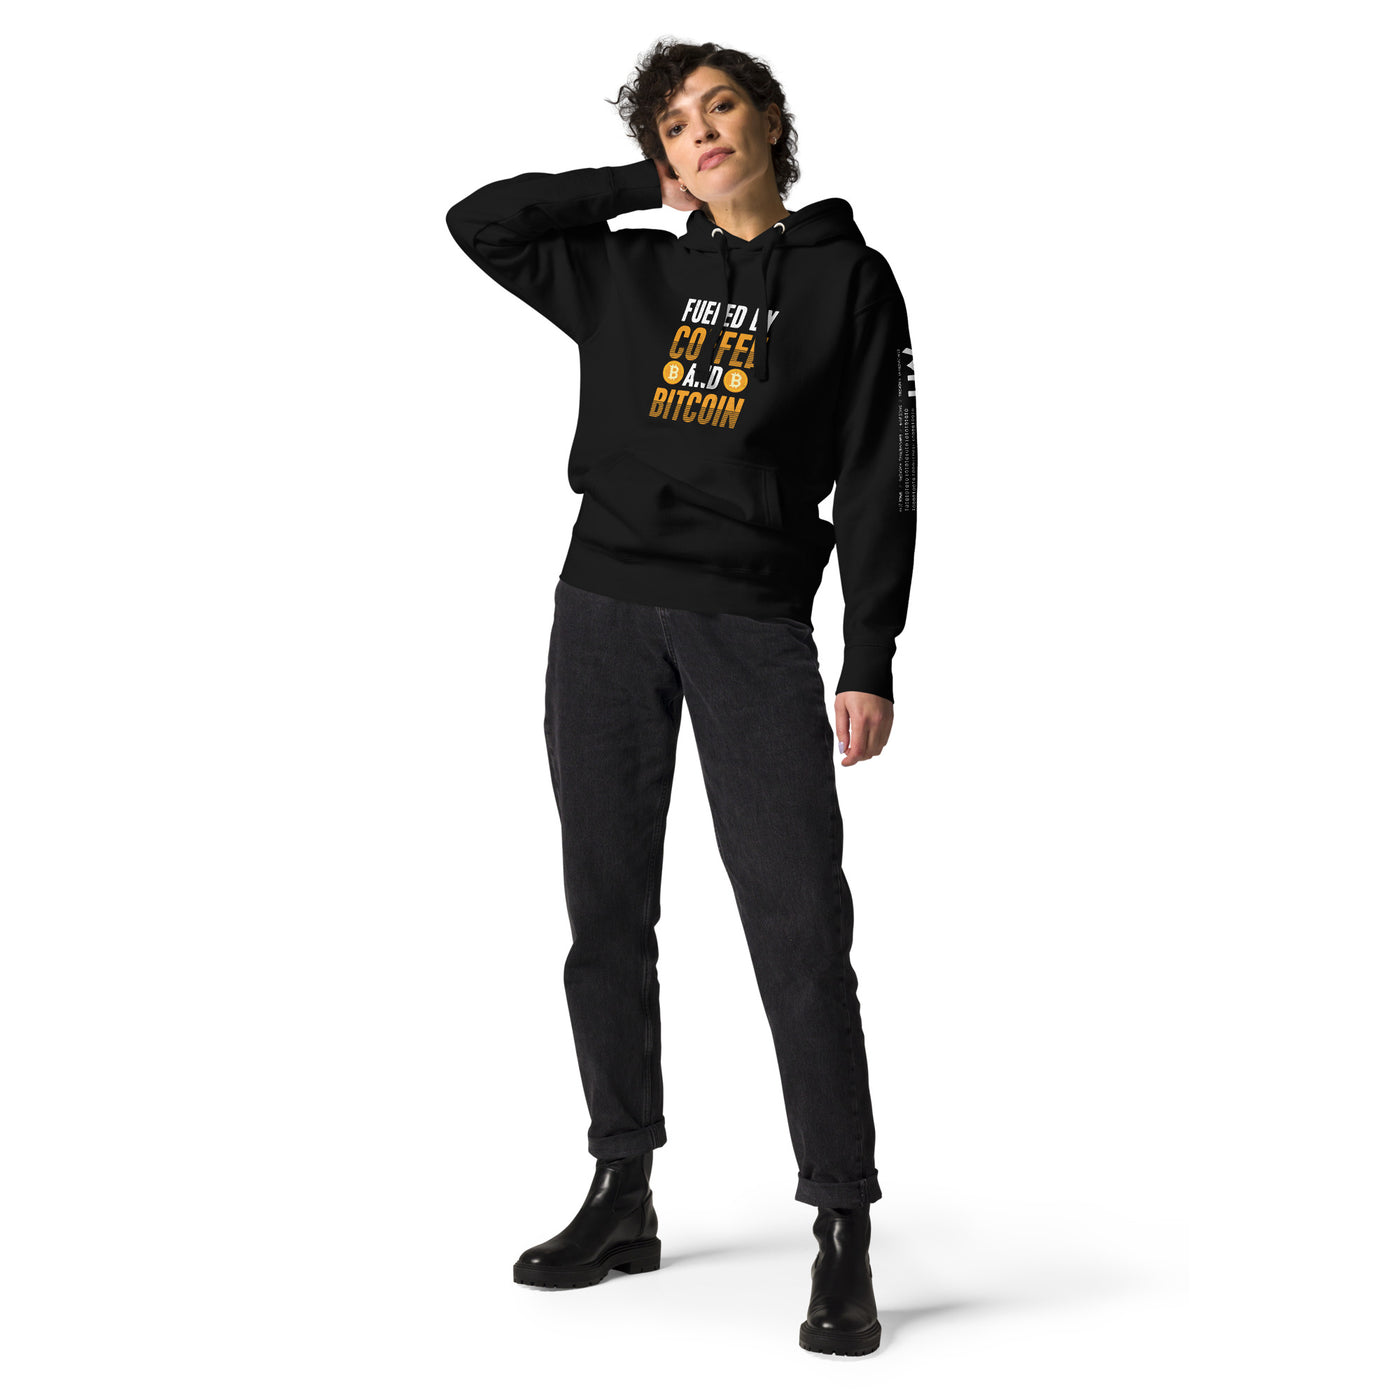 Fueled by Coffee and Bitcoin - Unisex Hoodie